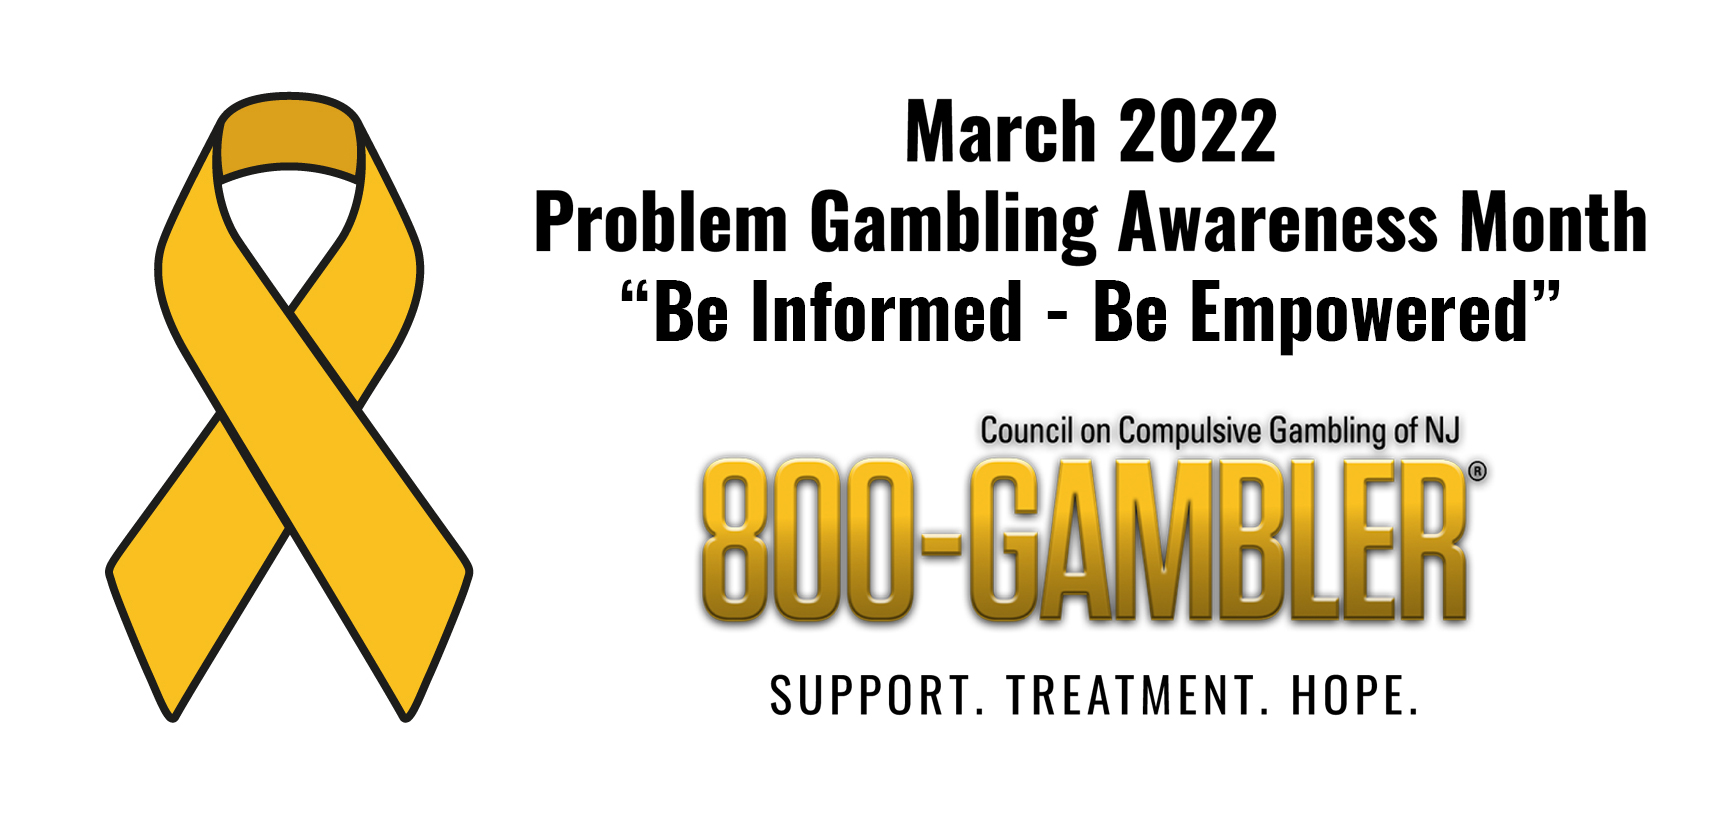 March 2022 is Problem Gambling Awareness Month. "Be Informed - Be Empowered."